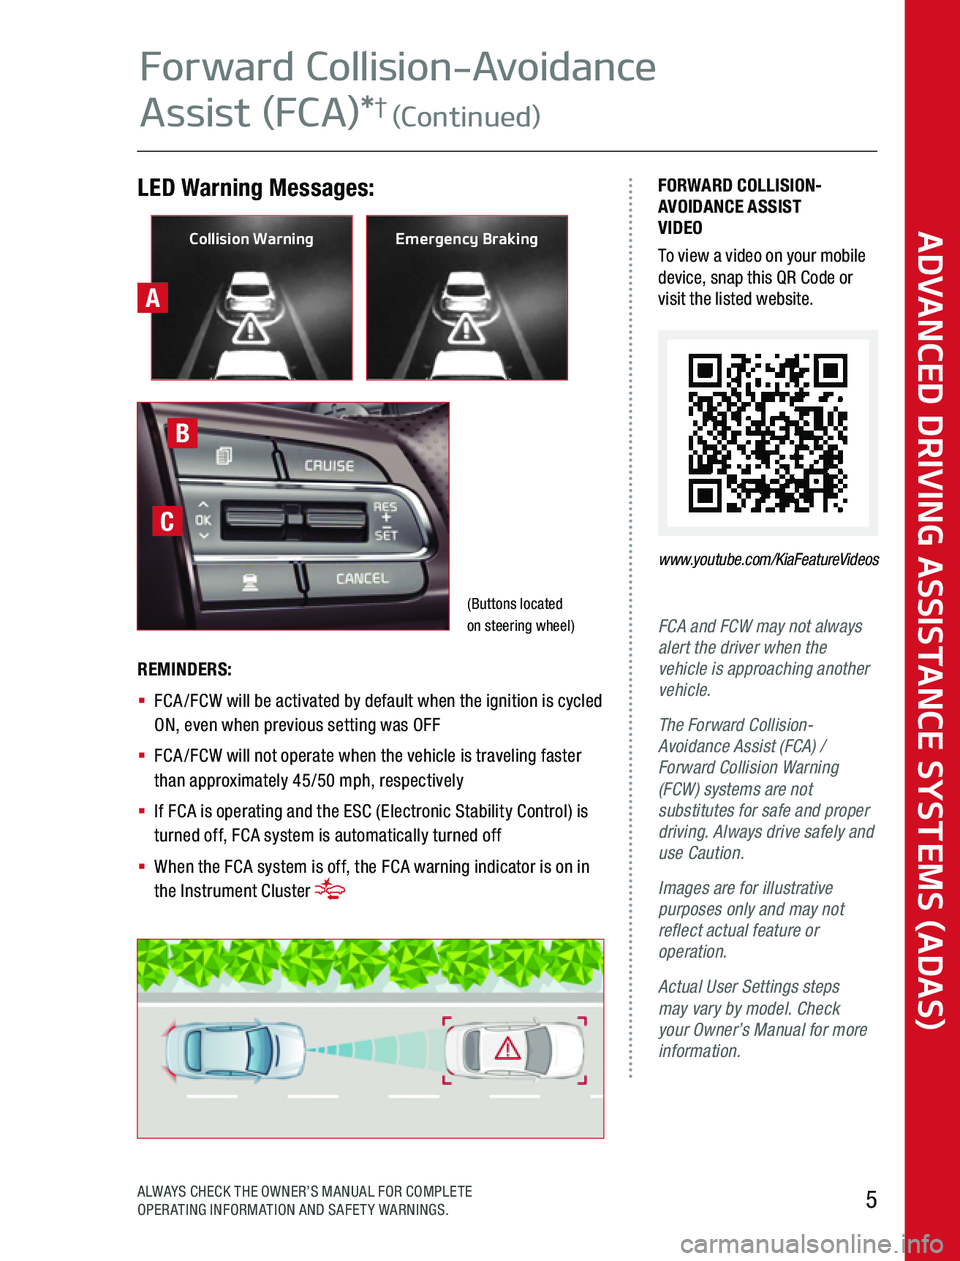 KIA NIRO 2020  Advanced Driving Assistance System A
LED Warning Messages:FORWARD COLLISION-AVOIDANCE ASSIST VIDEOTo view a video on your mobile device, snap this QR Code or visit the listed website 
www.youtube.com/KiaFeatureVideos
FCA and FCW may no